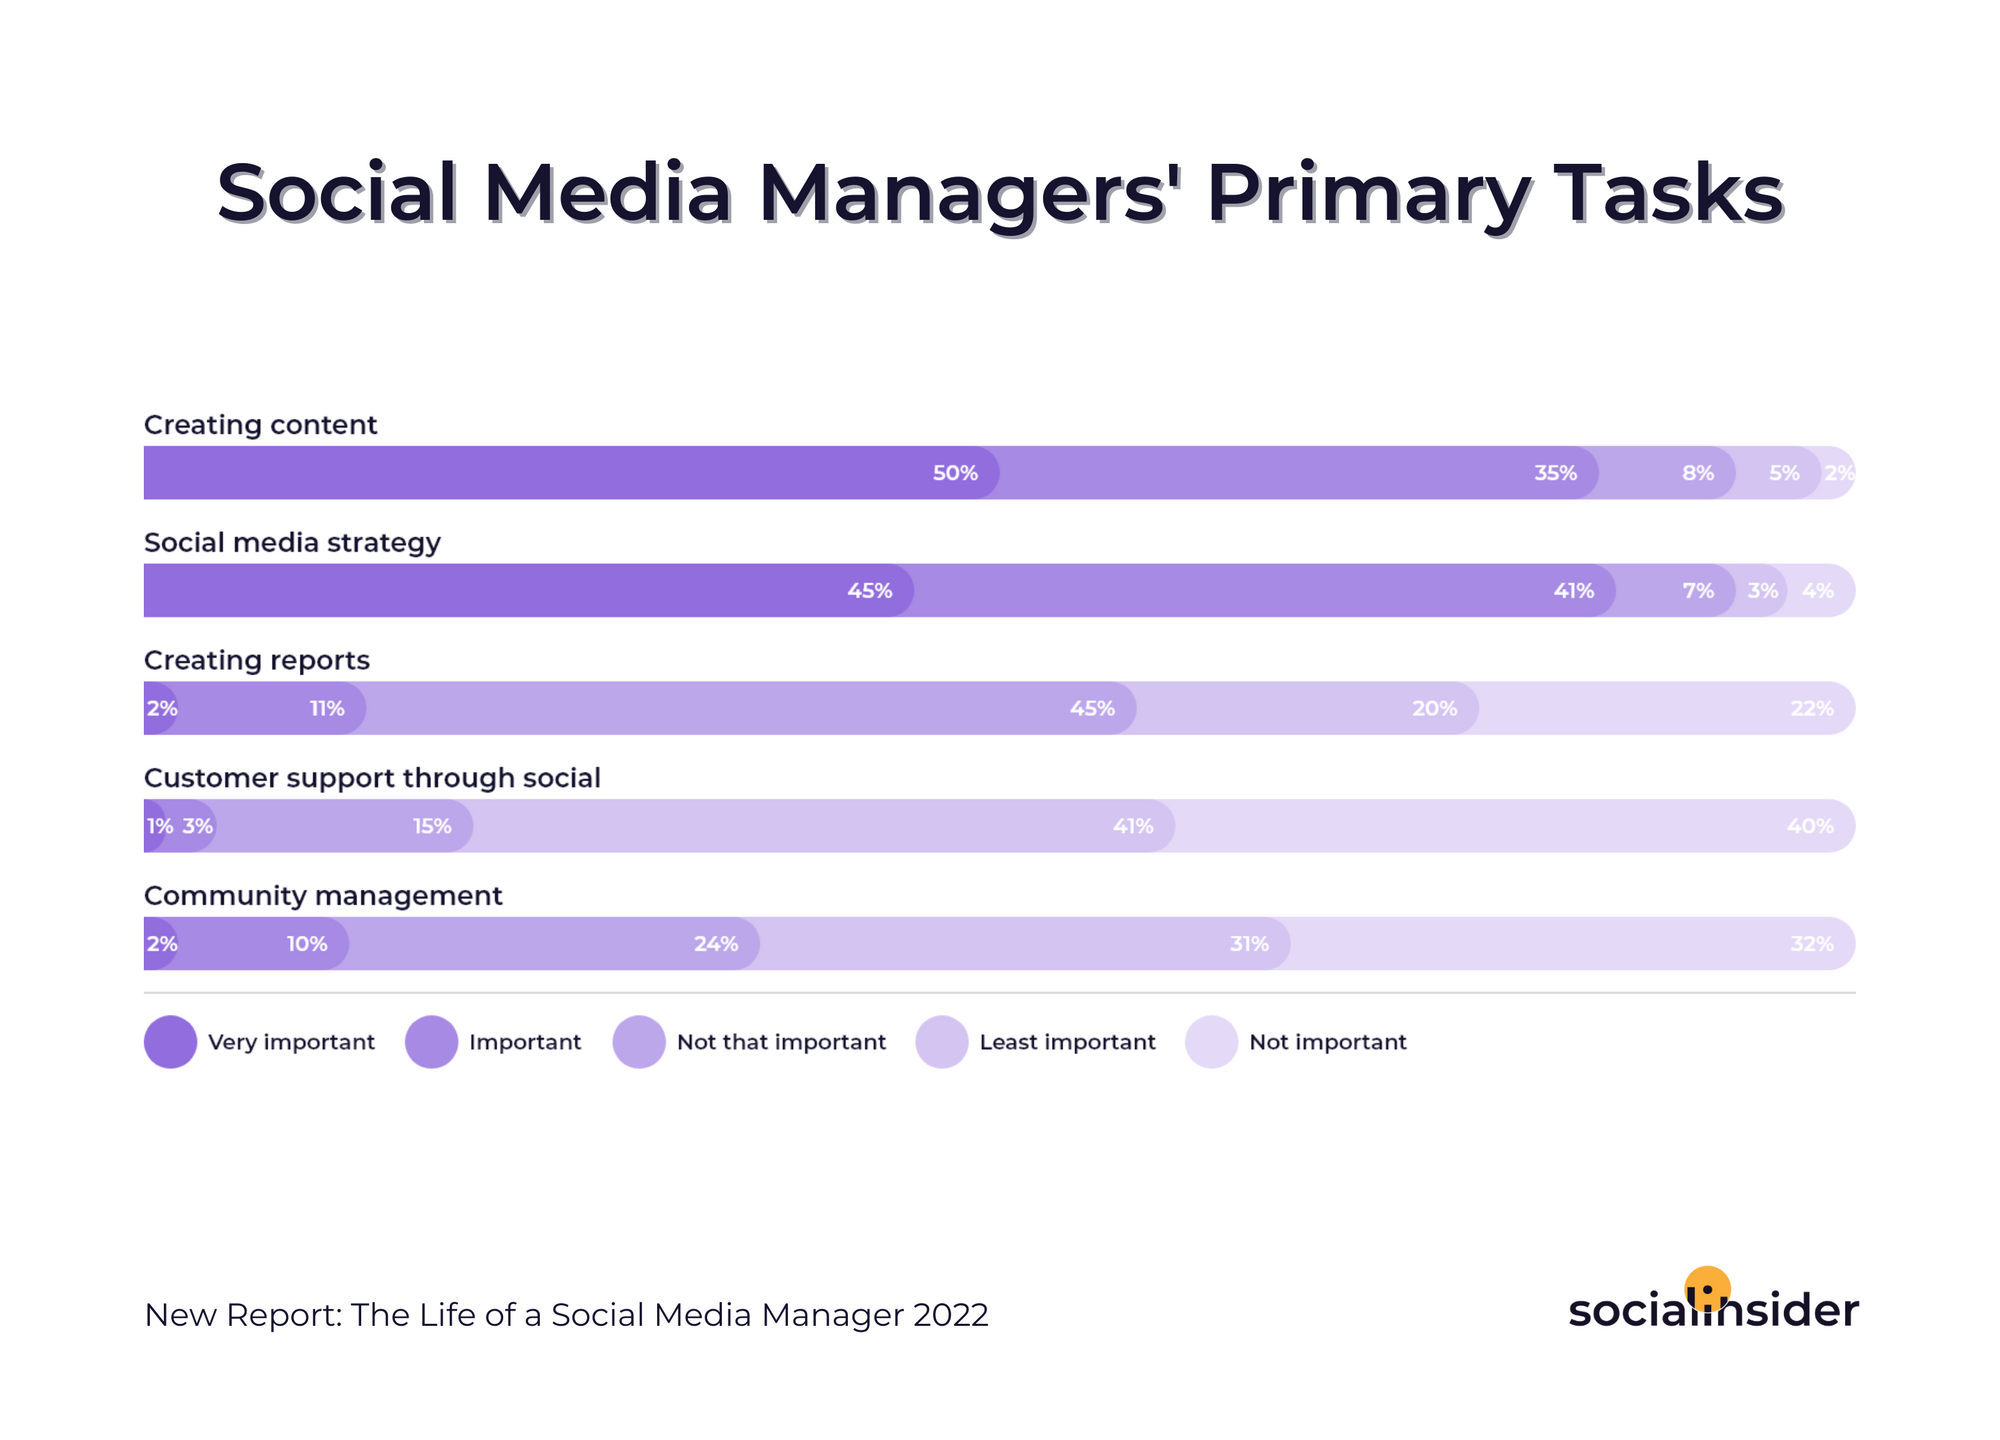 This is a graphic showing what are social media managers' primary tasks.